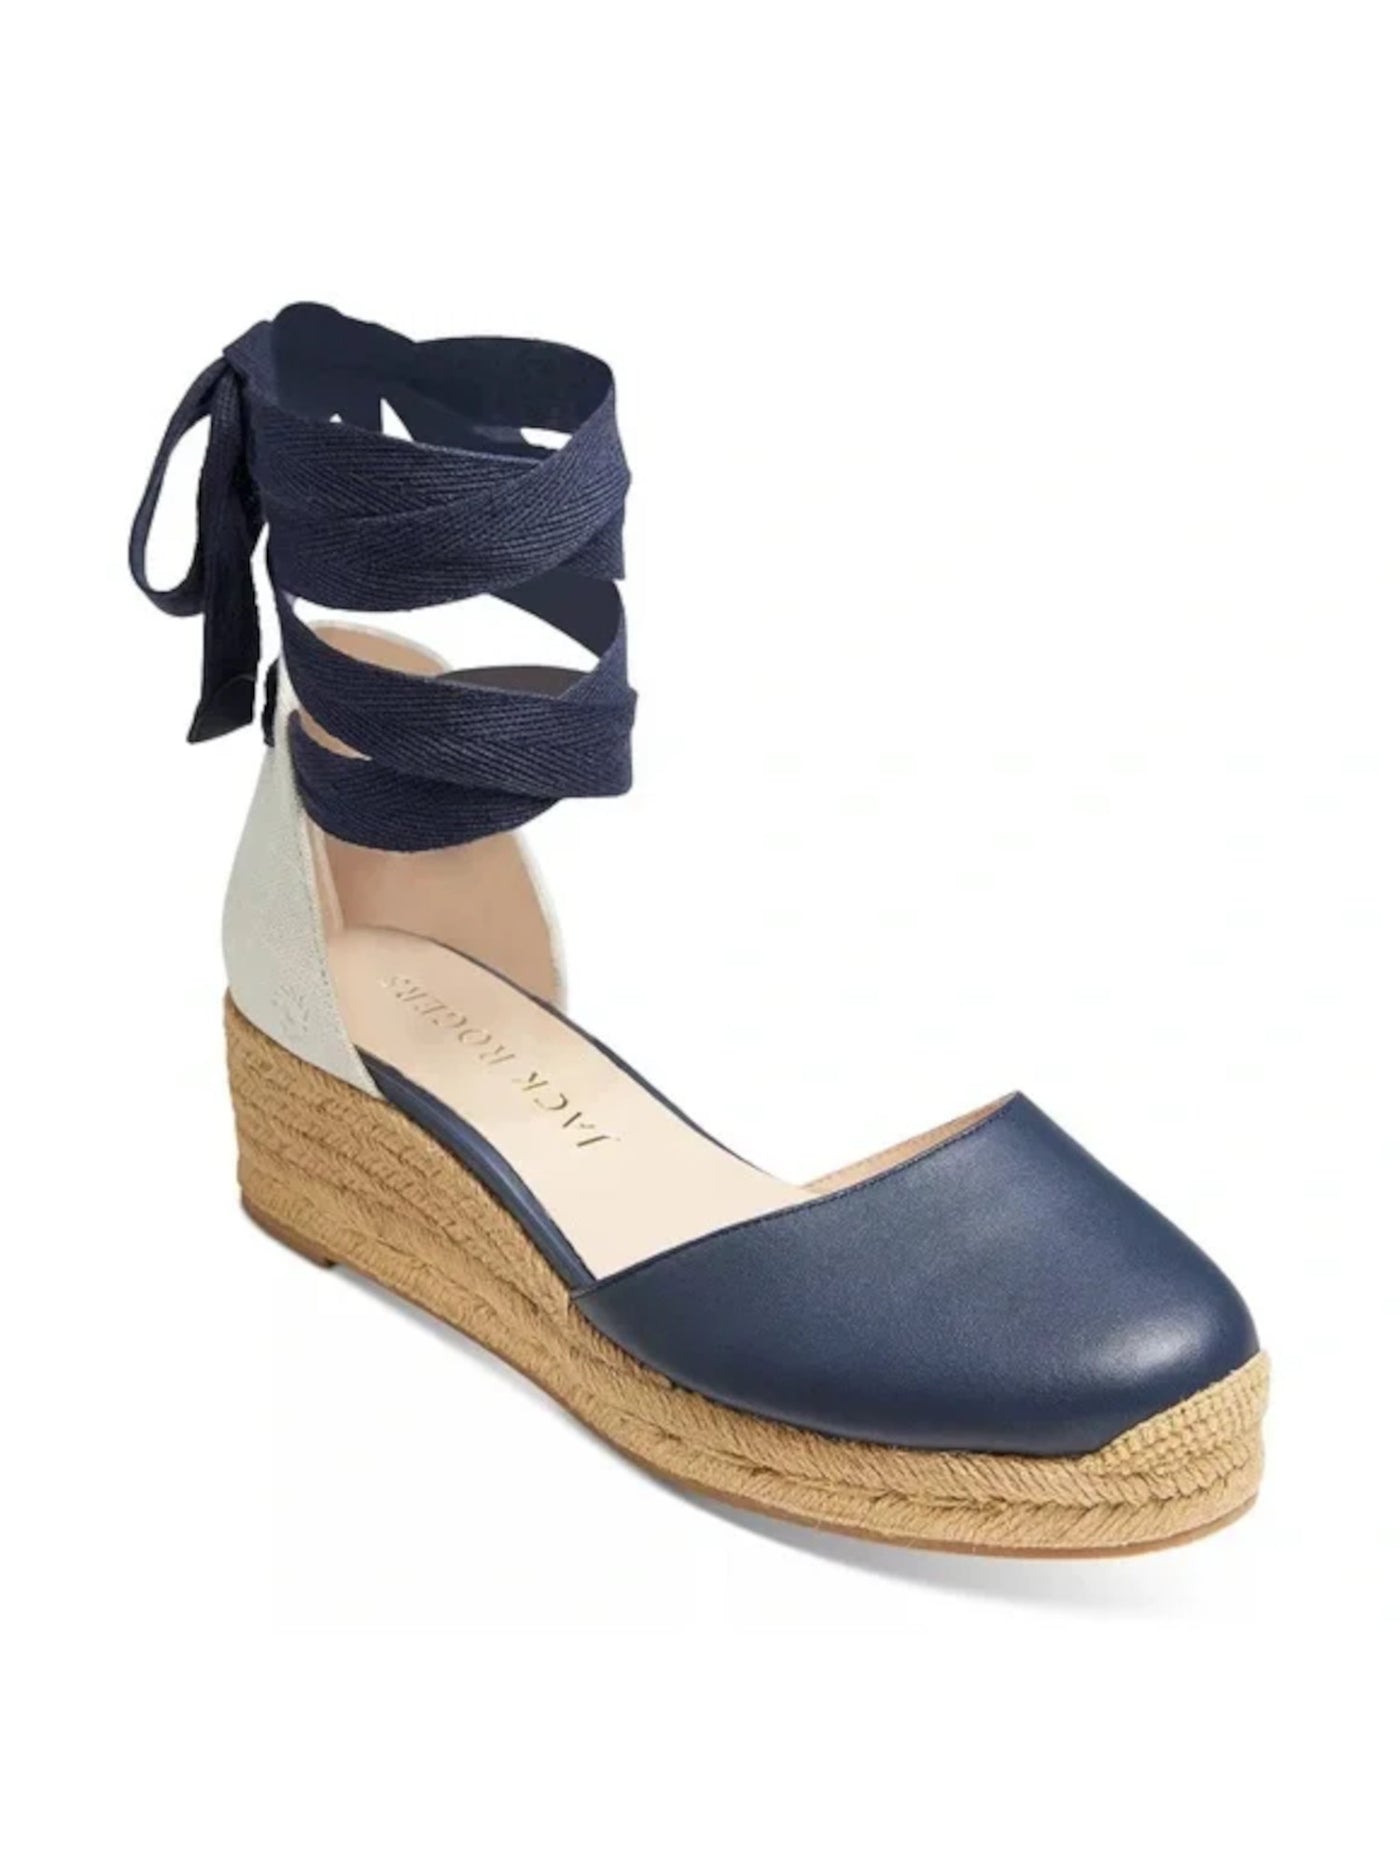 JACK ROGERS Womens Navy Mixed Media 1" Platform Wrapping Ankle Padded Palmer Round Toe Wedge Lace-Up Leather Espadrille Shoes 8 M